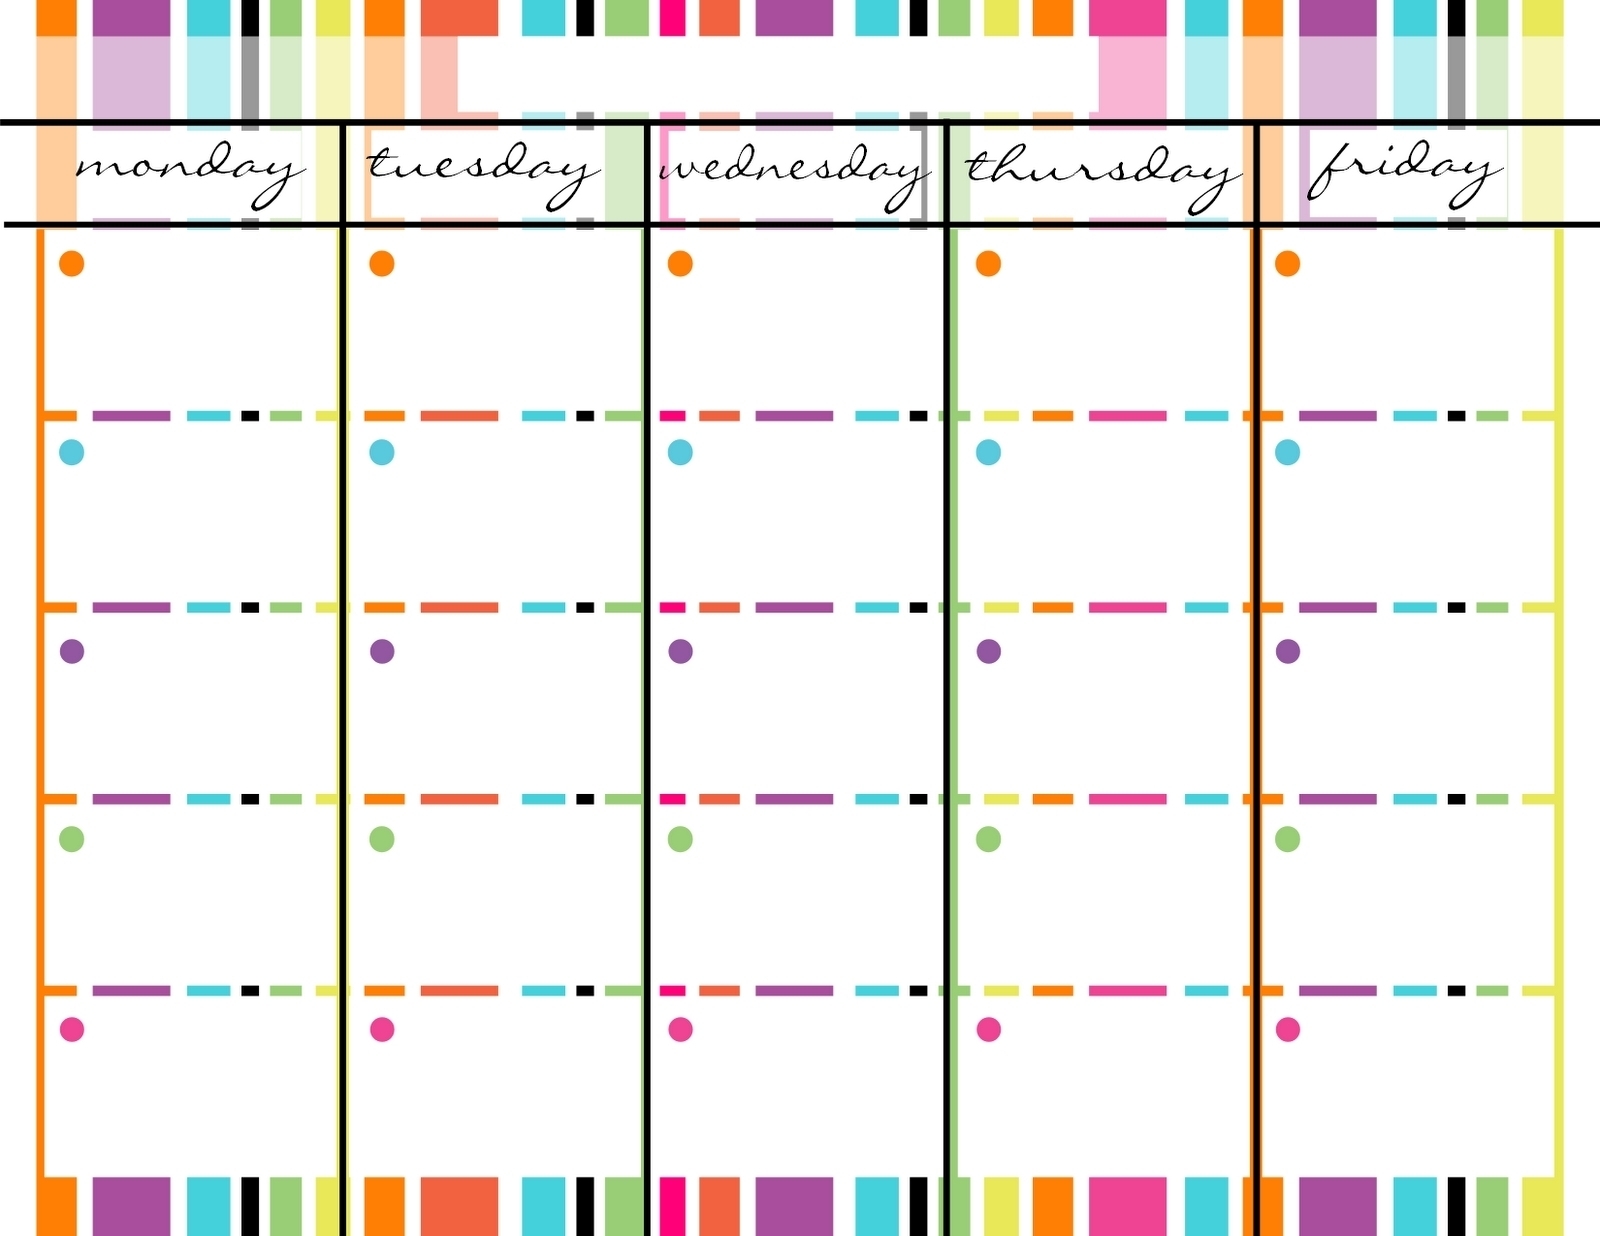 Free Weekly Schedule Templates For Word Y Through Friday Daily regarding Printable Weekly Schedule Monday Thru Friday